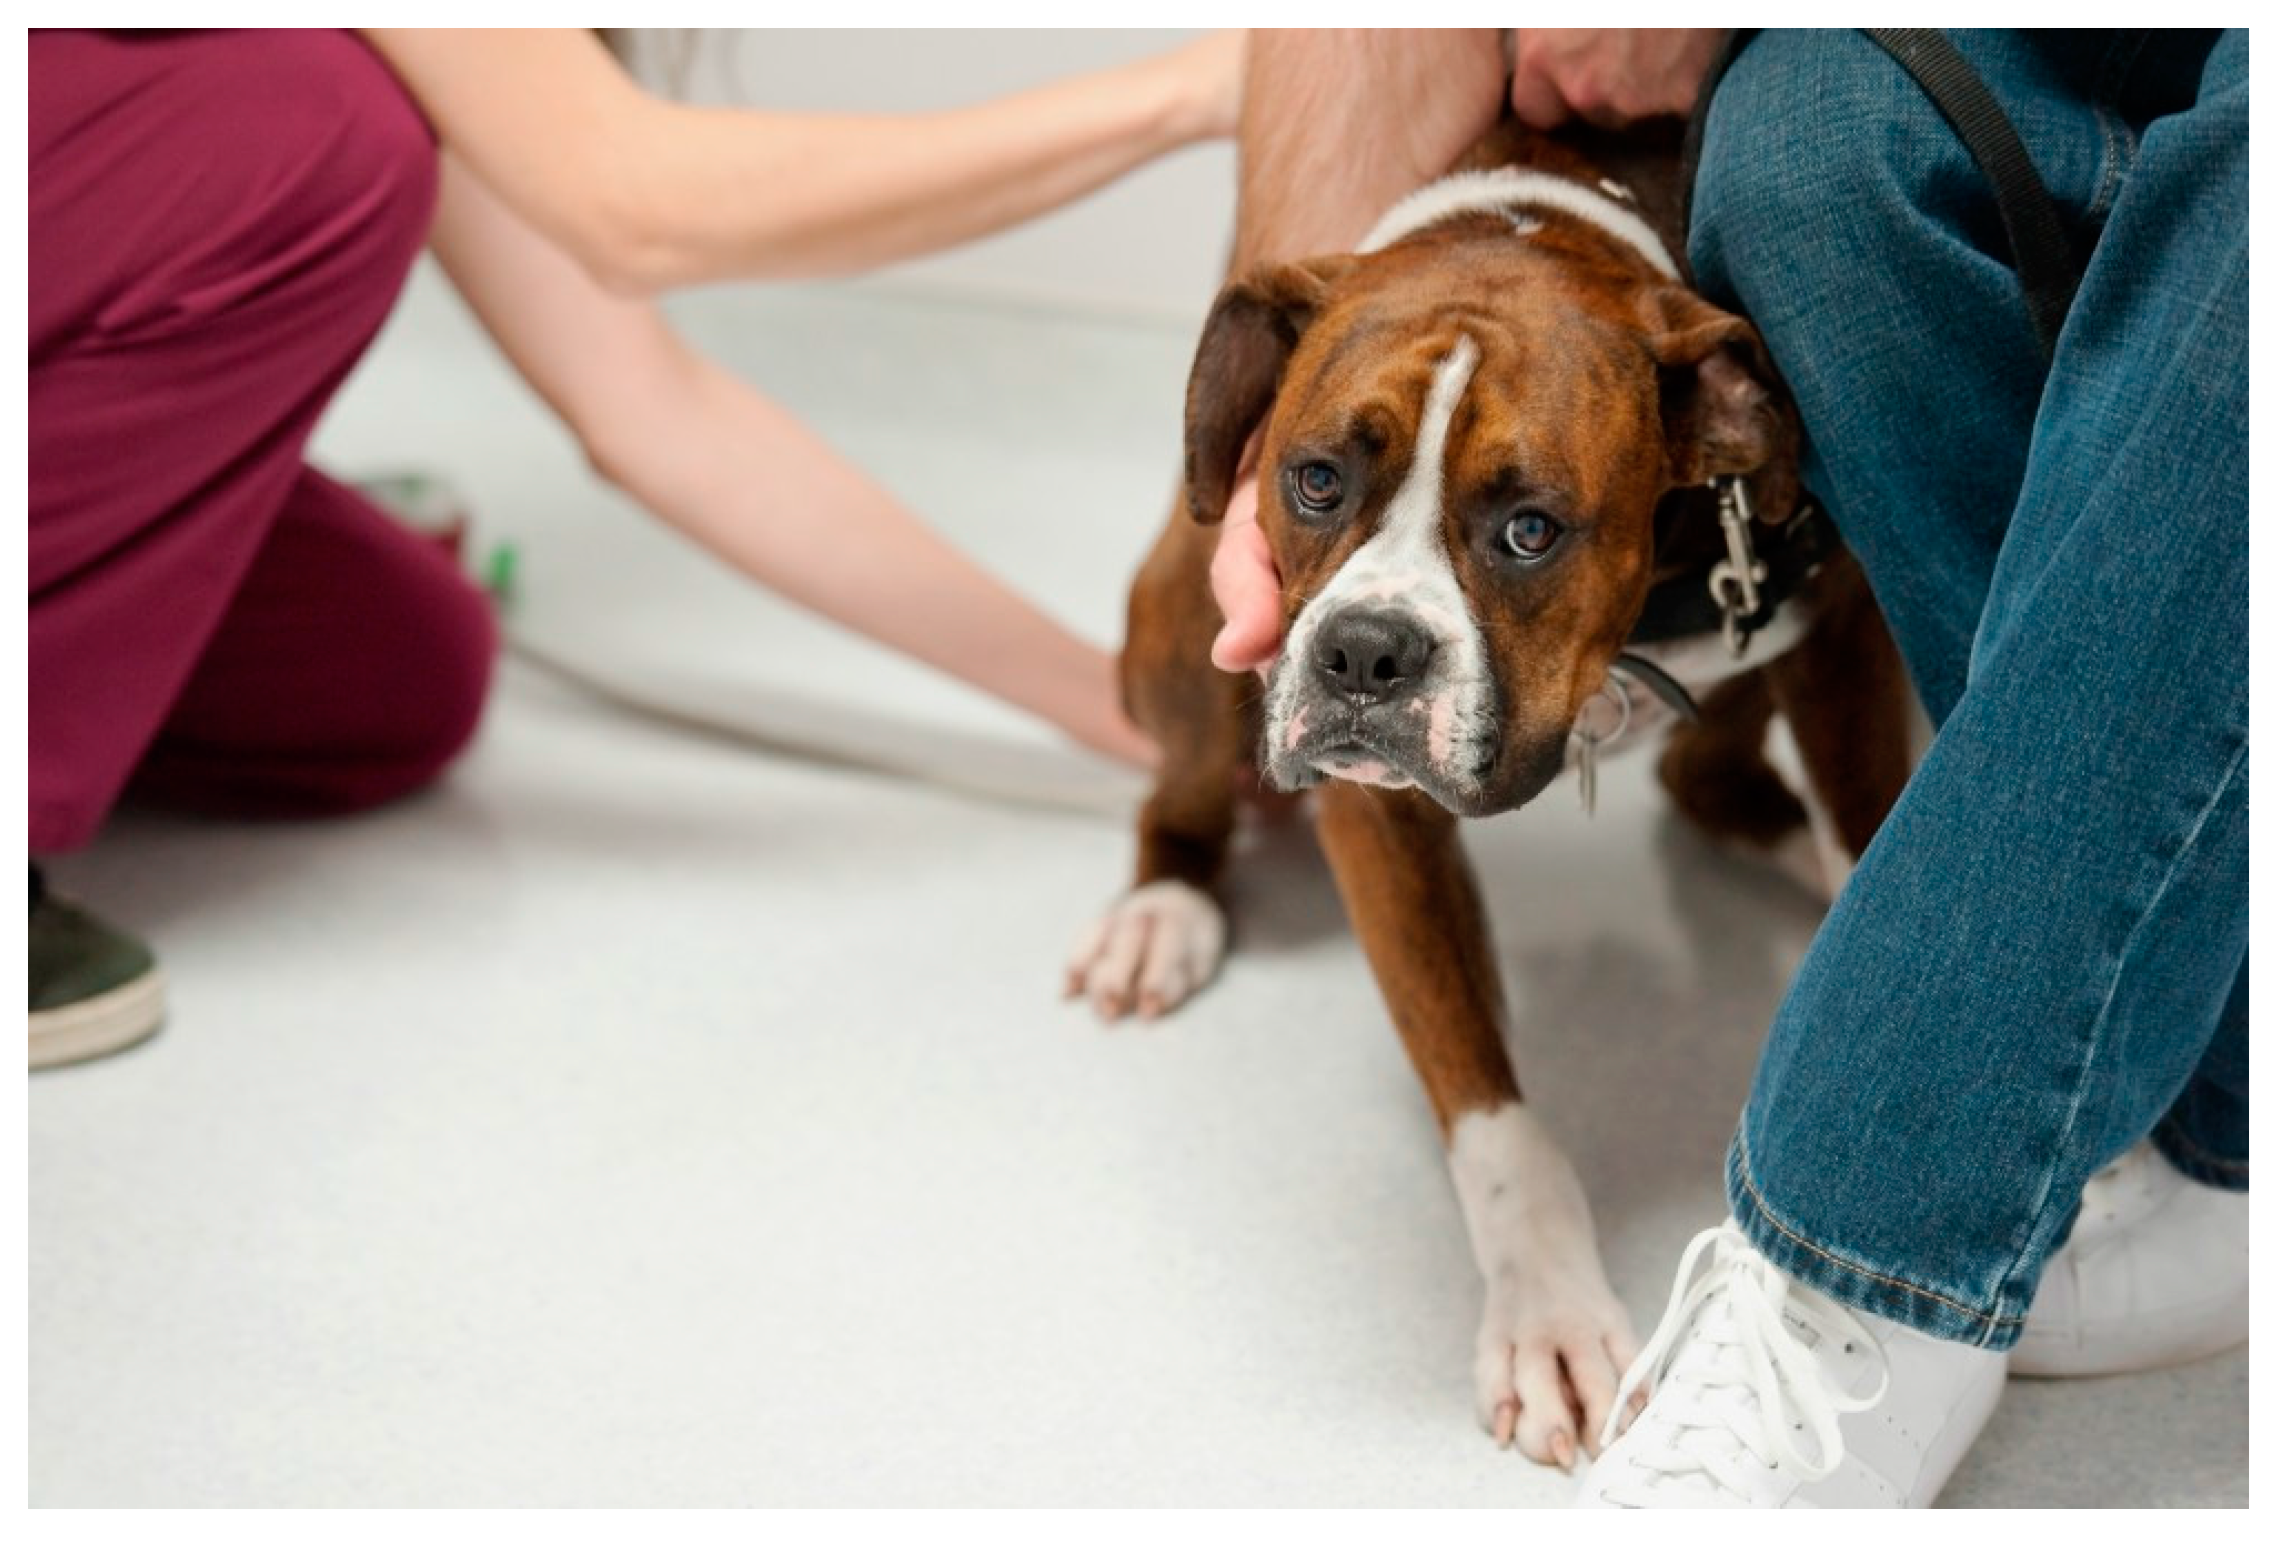 Veterinary Sciences | Free Full-Text | Minimising Stress for Patients in  the Veterinary Hospital: Why It Is Important and What Can Be Done about It